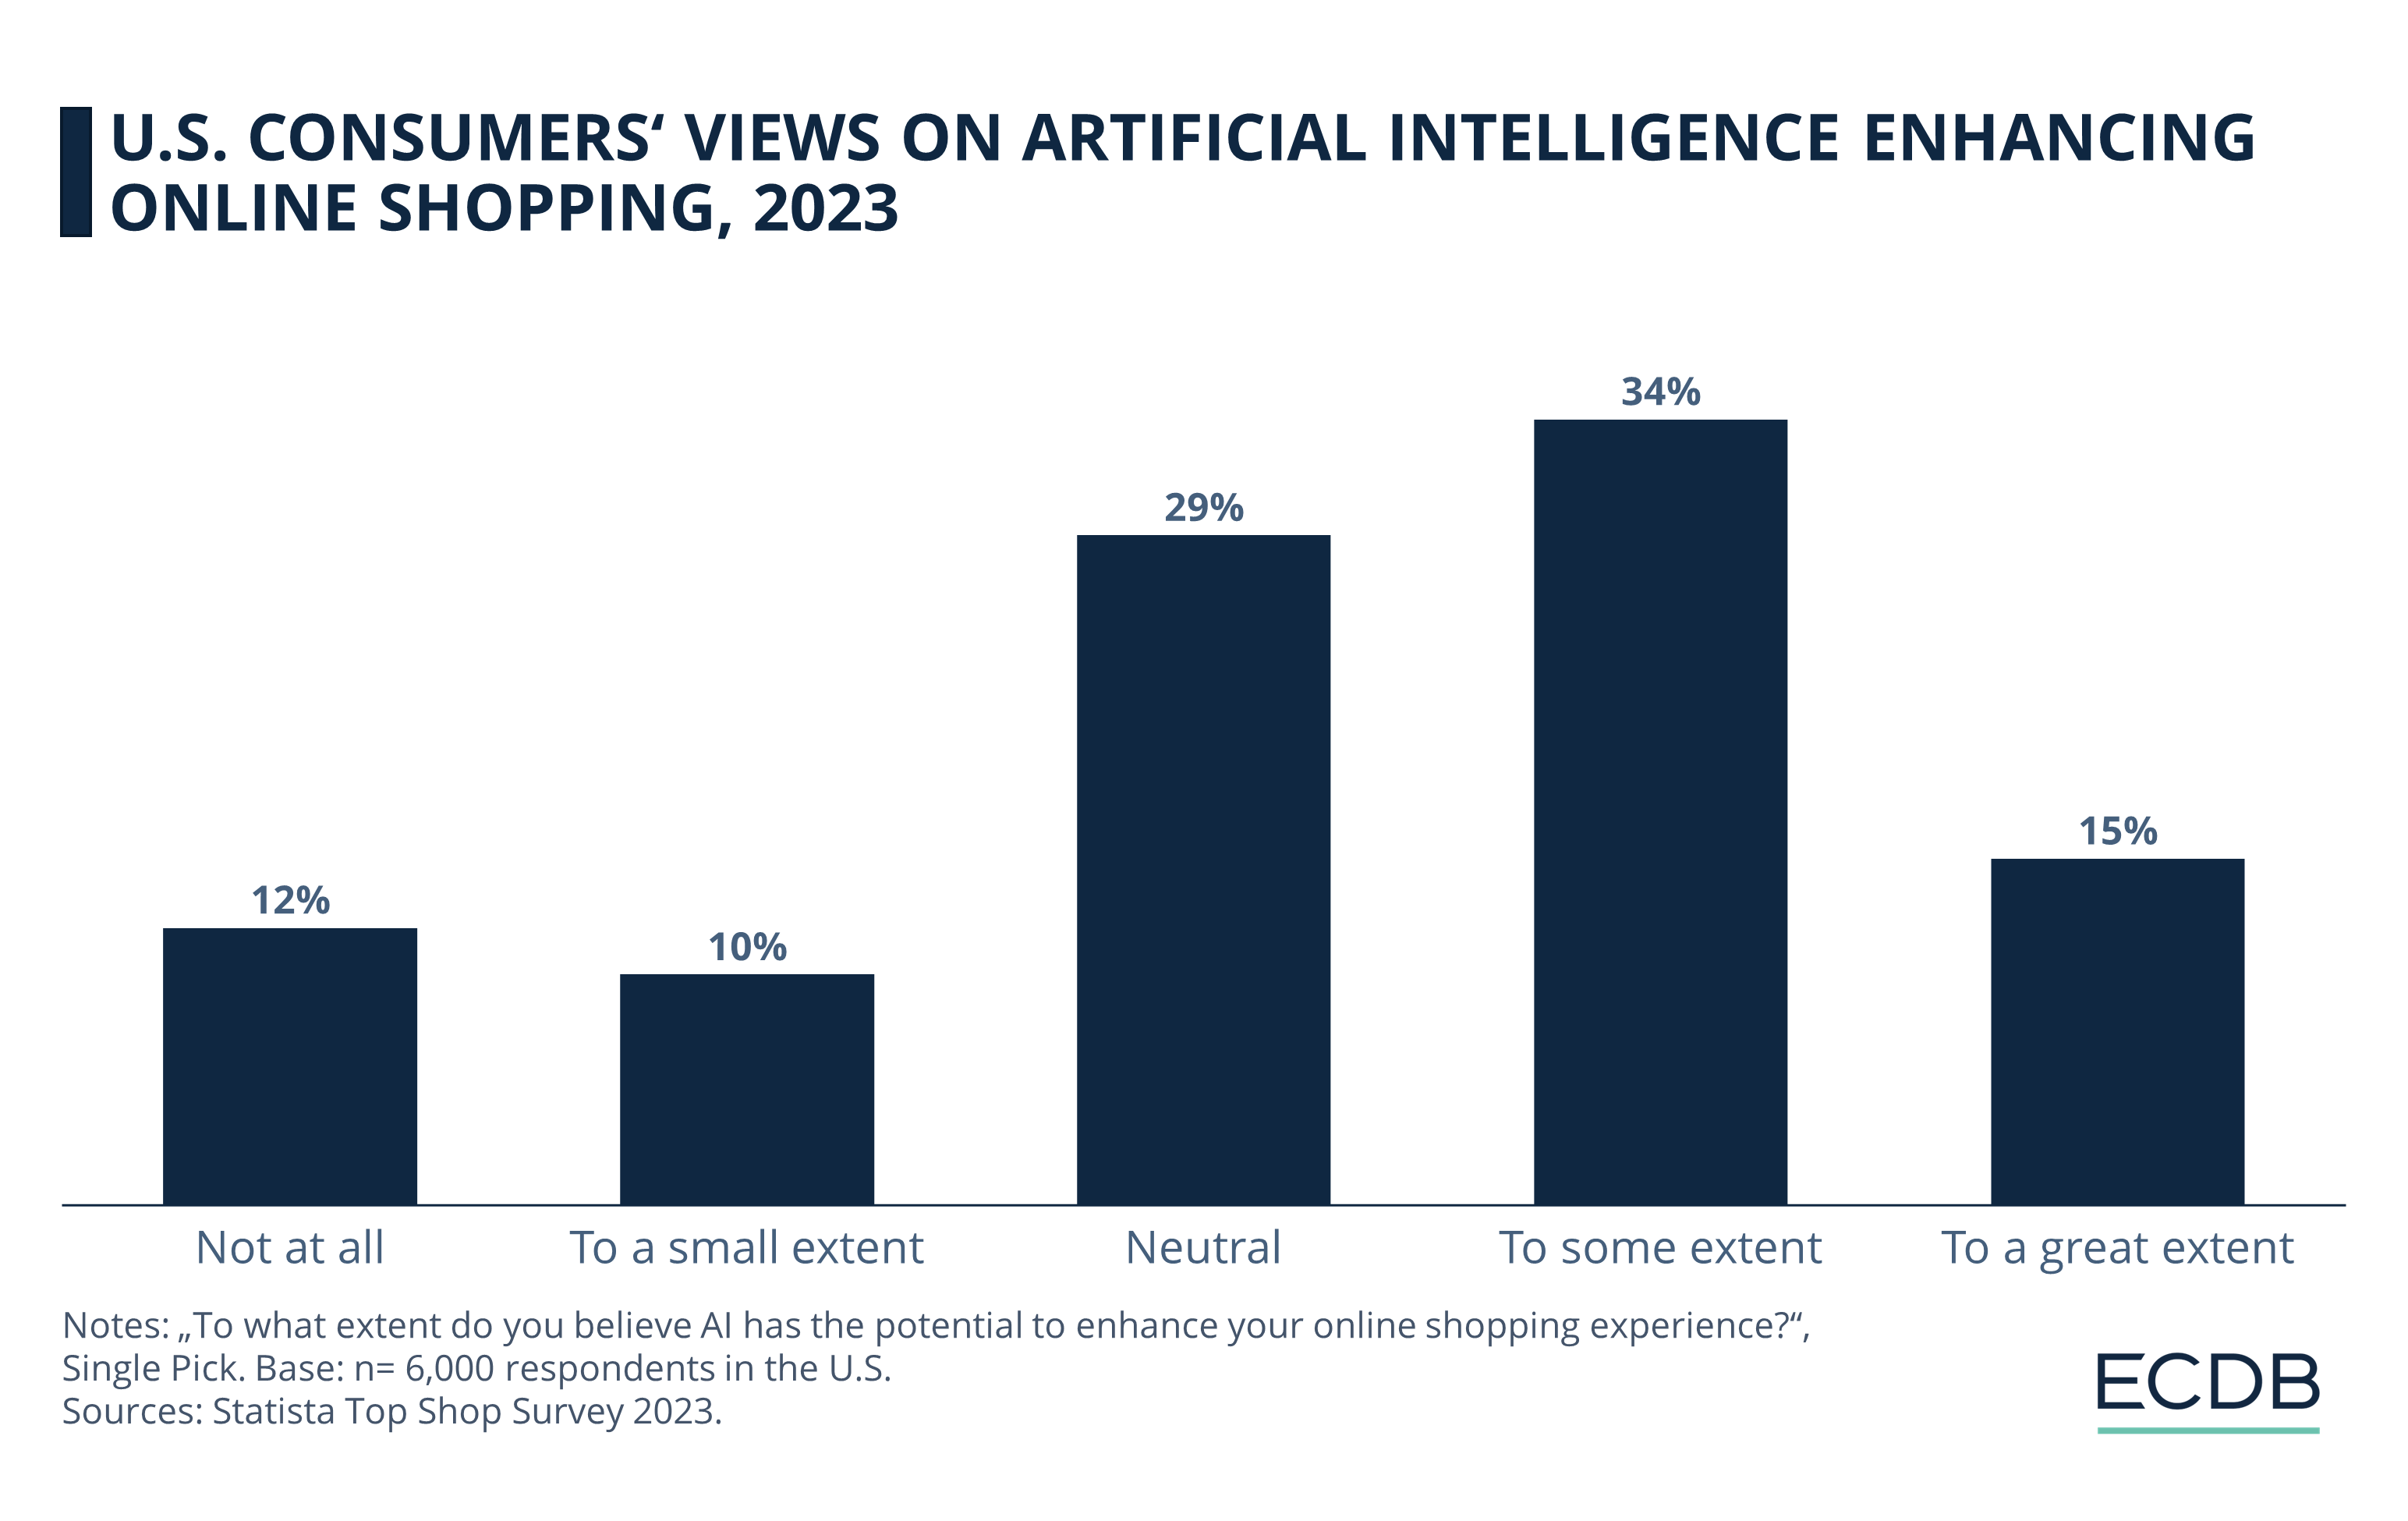 U.S. Consumers' View on Artificial Intelligence Enhancing Online Shopping, 2023